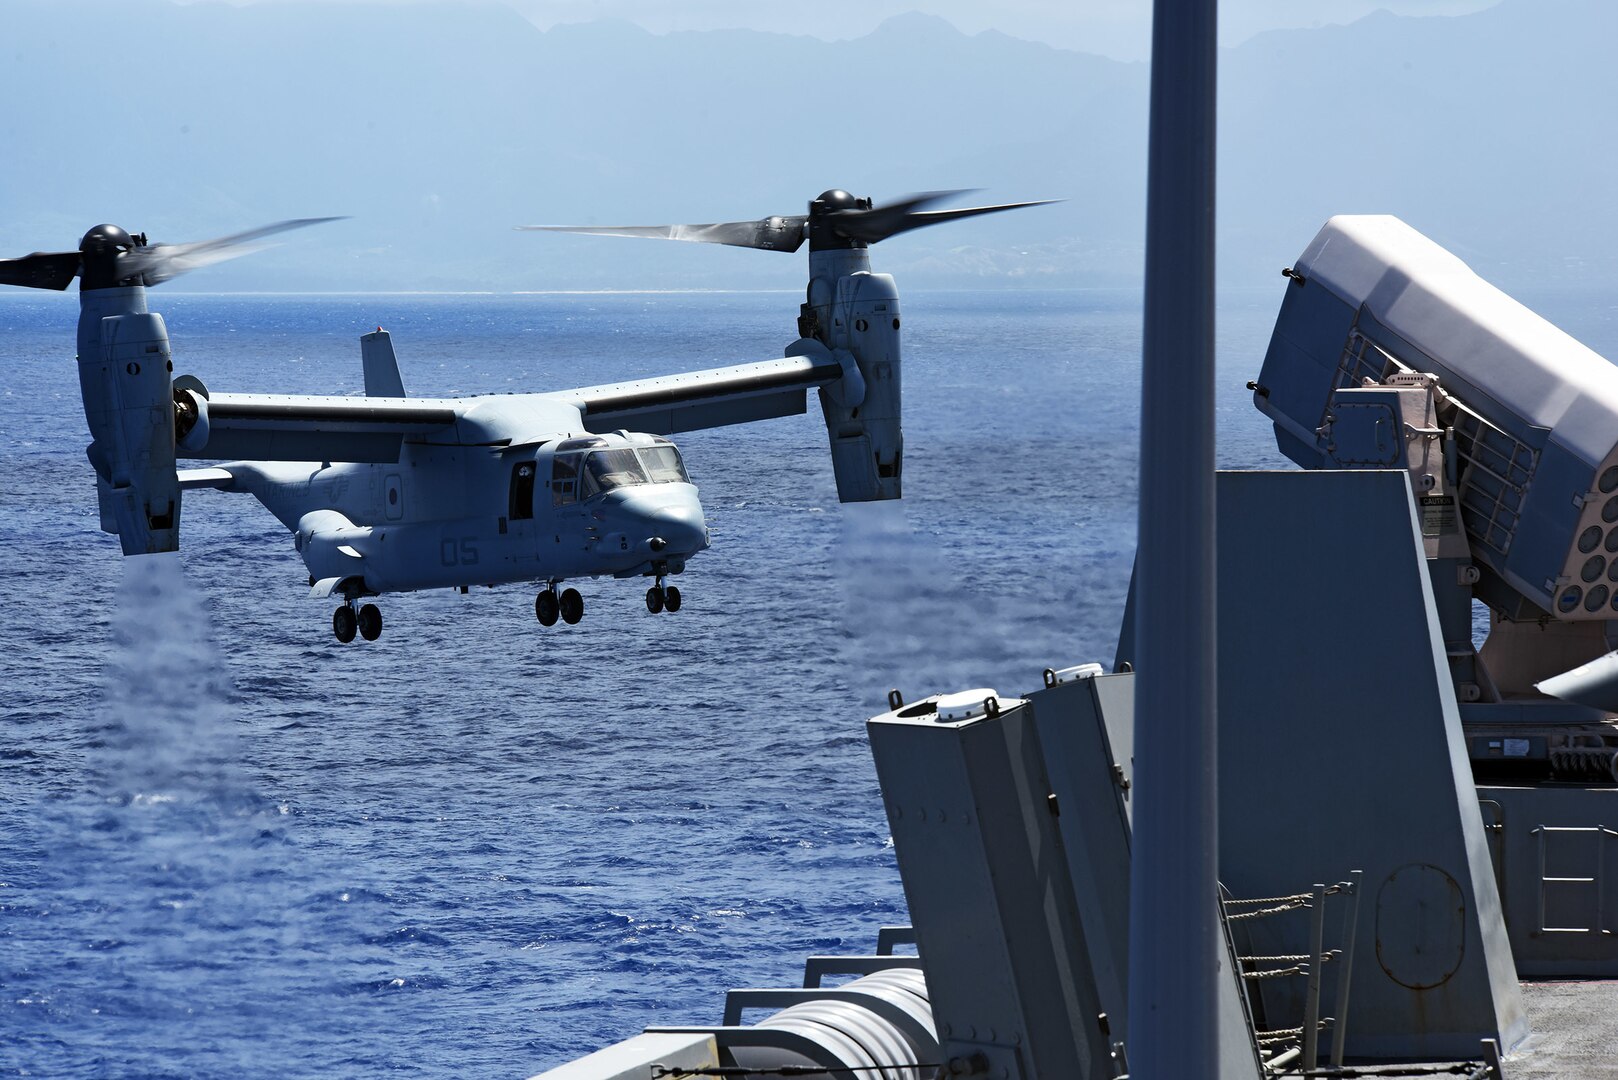 PACIFIC OCEAN (July 14, 2017) - An MV-22 Osprey, assigned to Marine Medium Tiltrotor Squadron (reinforced) 161, approaches the flight deck of the amphibious transport dock ship USS San Diego (LPD 22) as part of a sustainment exercise. San Diego is embarked on a scheduled deployment as part of the America Amphibious Ready Group, which is comprised of more than 1,800 Sailors and 2,600 Marines assigned to the amphibious assault ship USS America (LHA 6), the amphibious dock landing ship USS Pearl Harbor (LSD 52) and San Diego. (U.S. Navy photo by Mass Communication Specialist 1st Class Joseph M. Buliavac/Released)